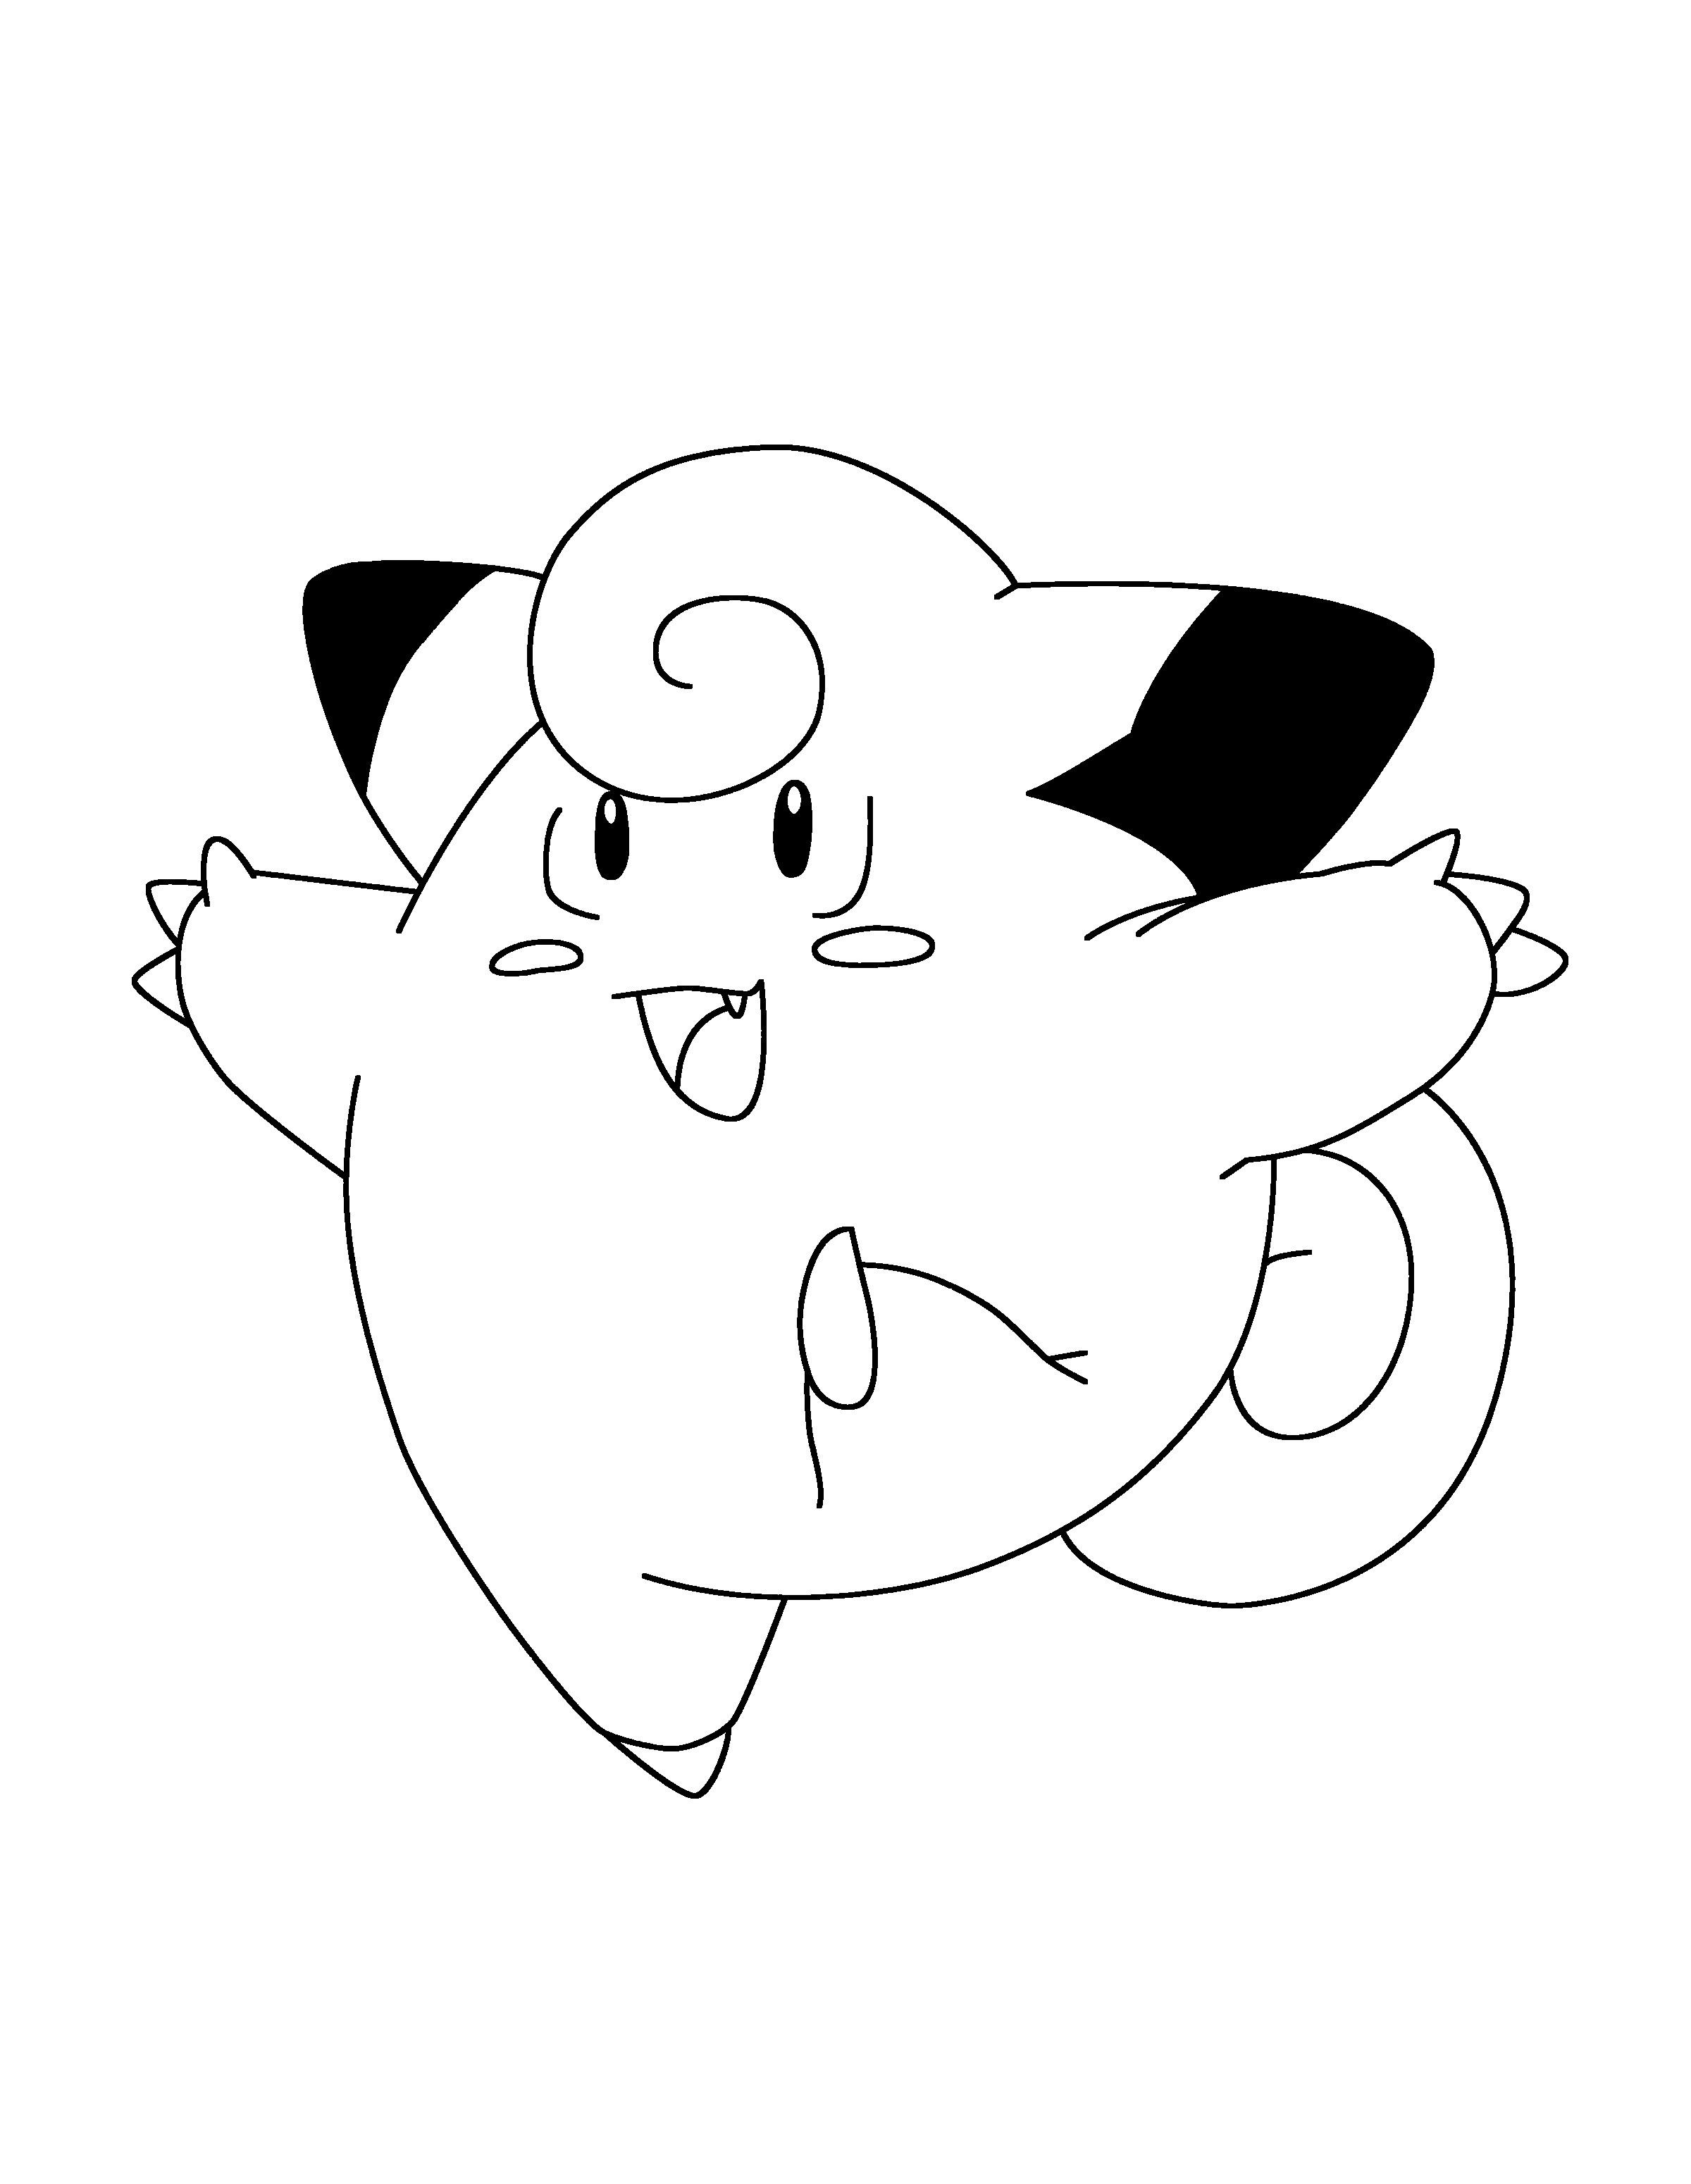 animated-coloring-pages-pokemon-image-0191